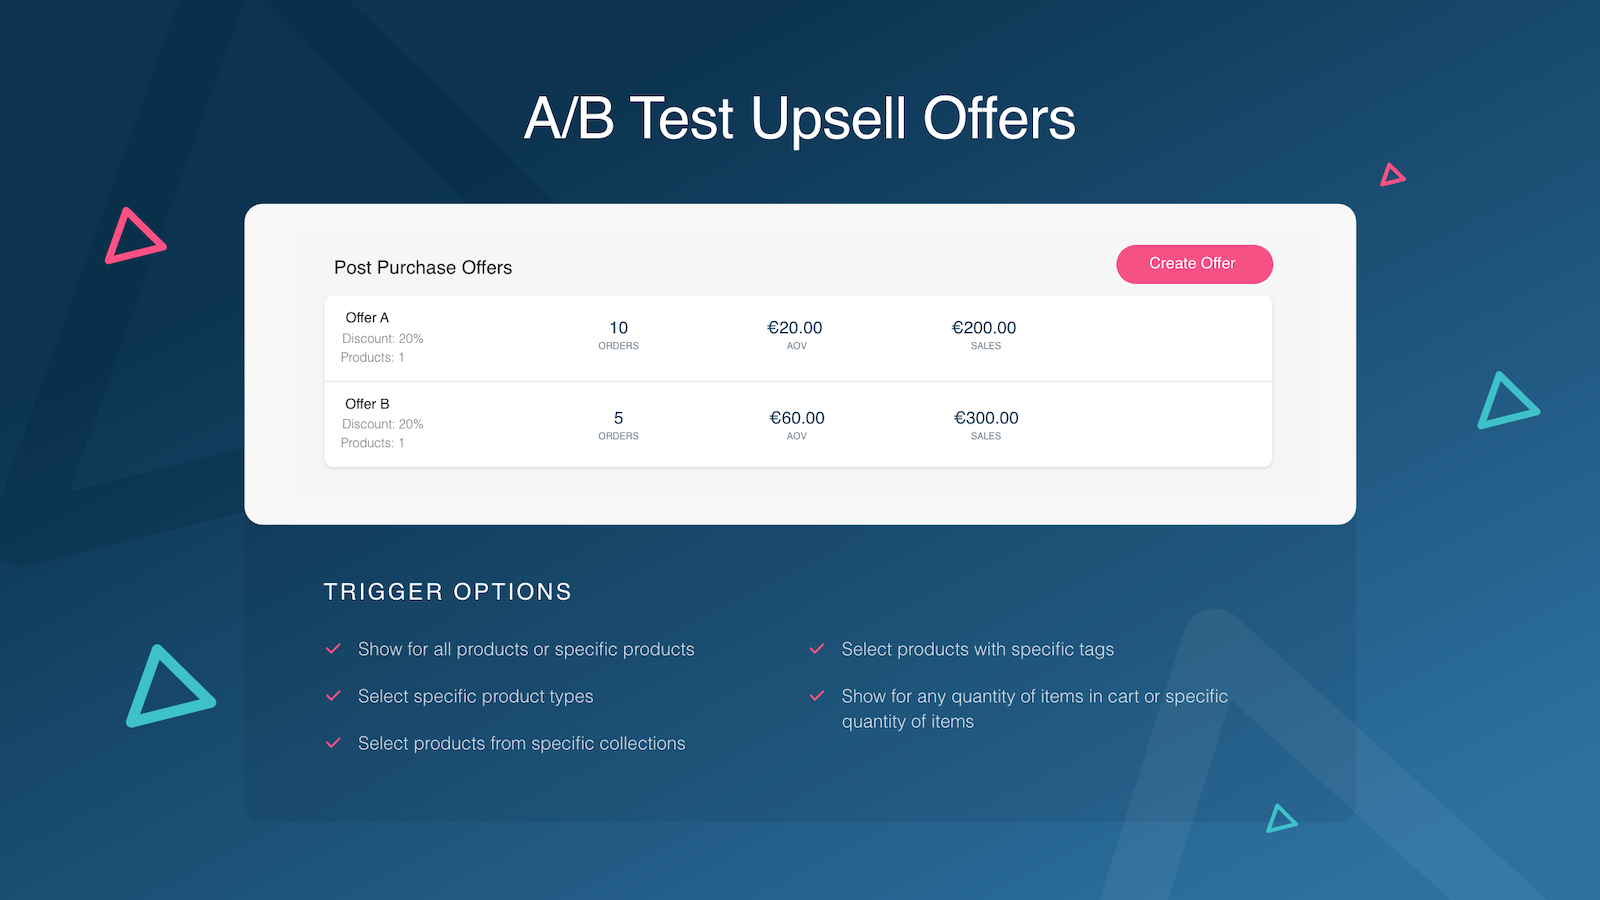 A/B Test Upsell & Cross Sell Offers